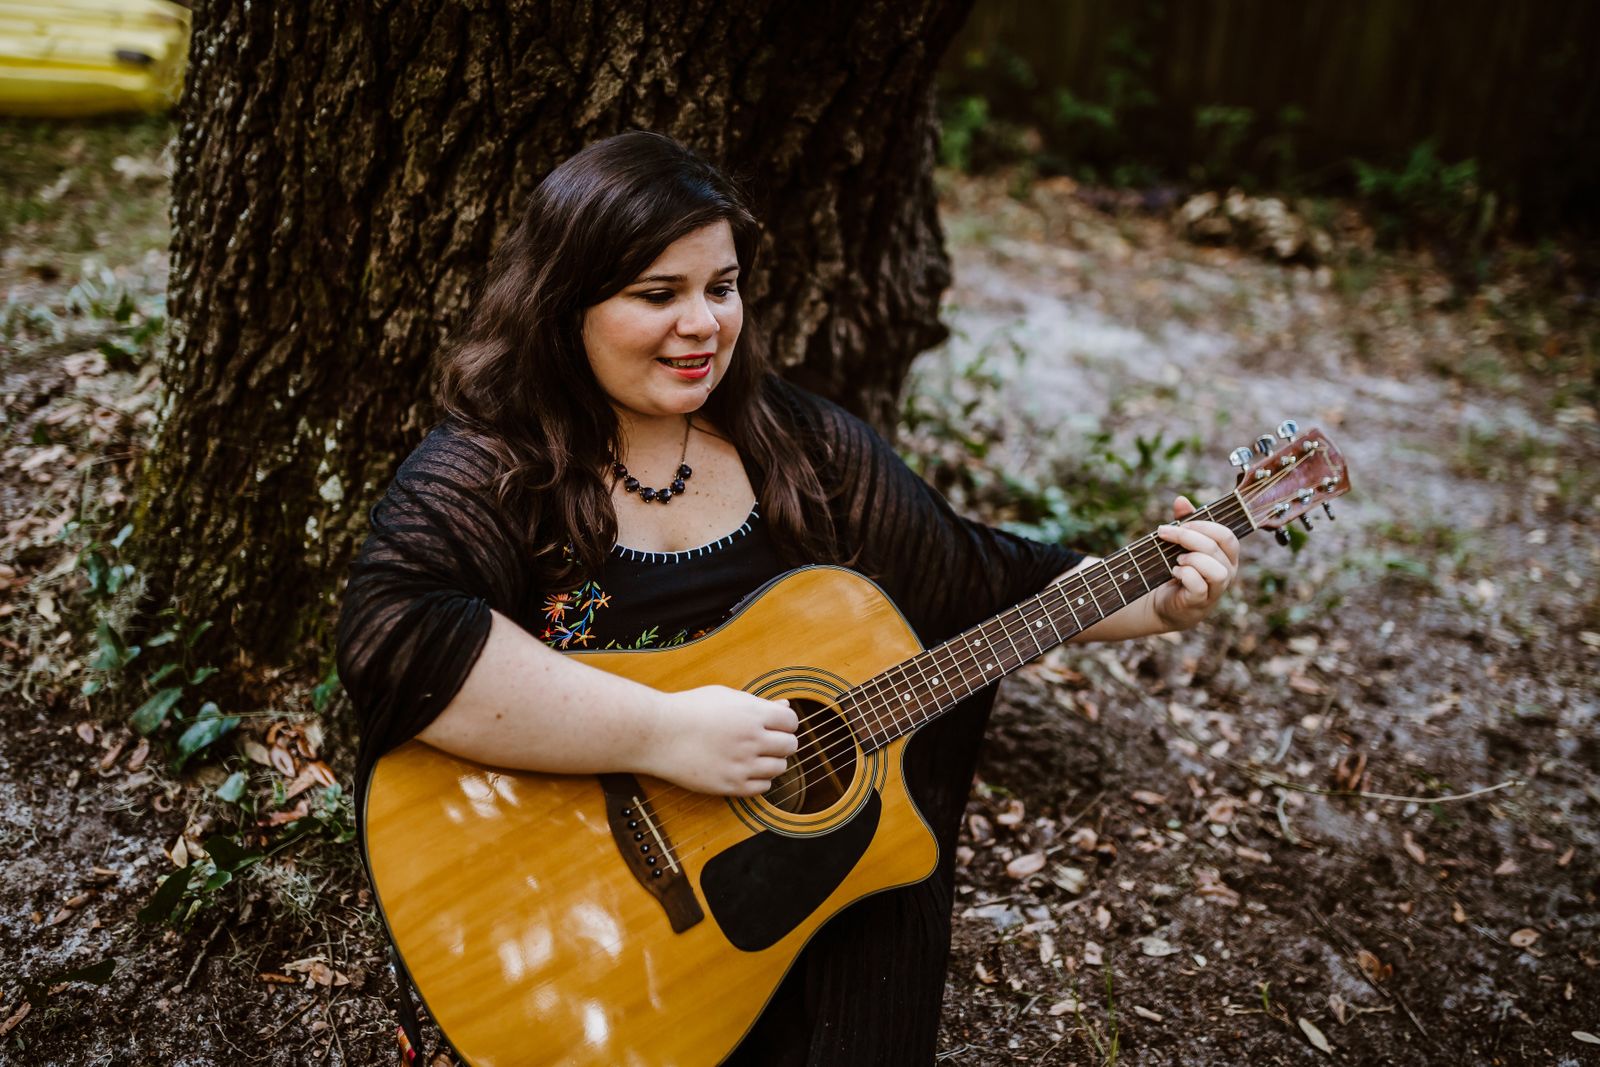 Photo of musician Ashley Feller sitting on ground under a large tree playing guitar